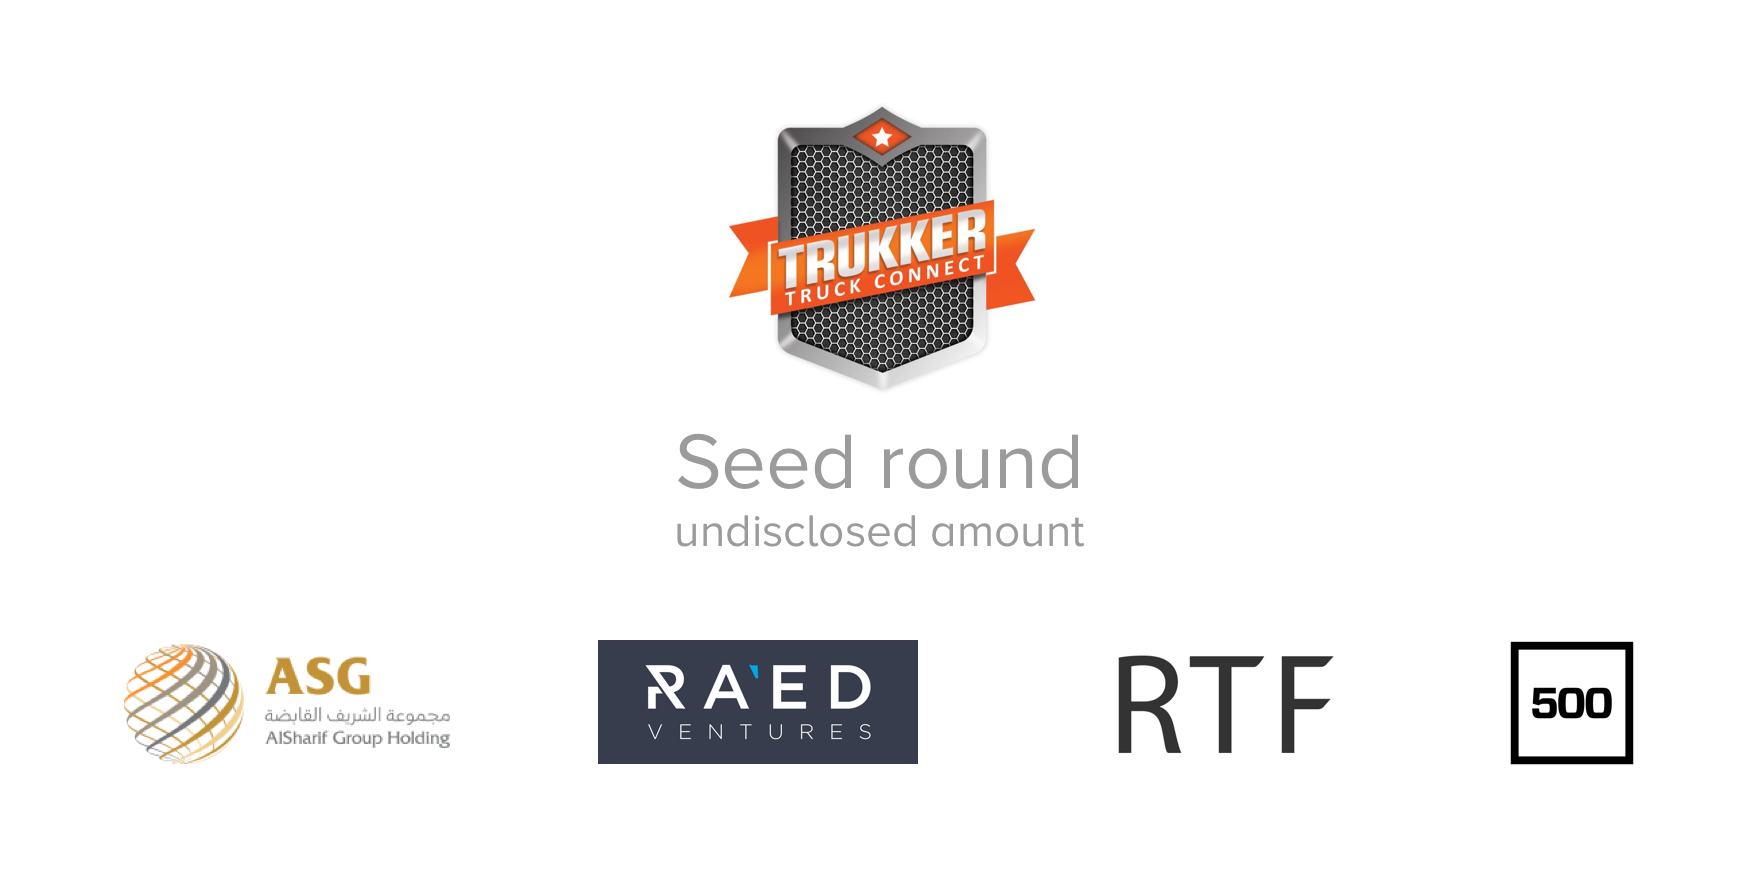 Raed Ventures led the $1.4m seed investment round of Trukker